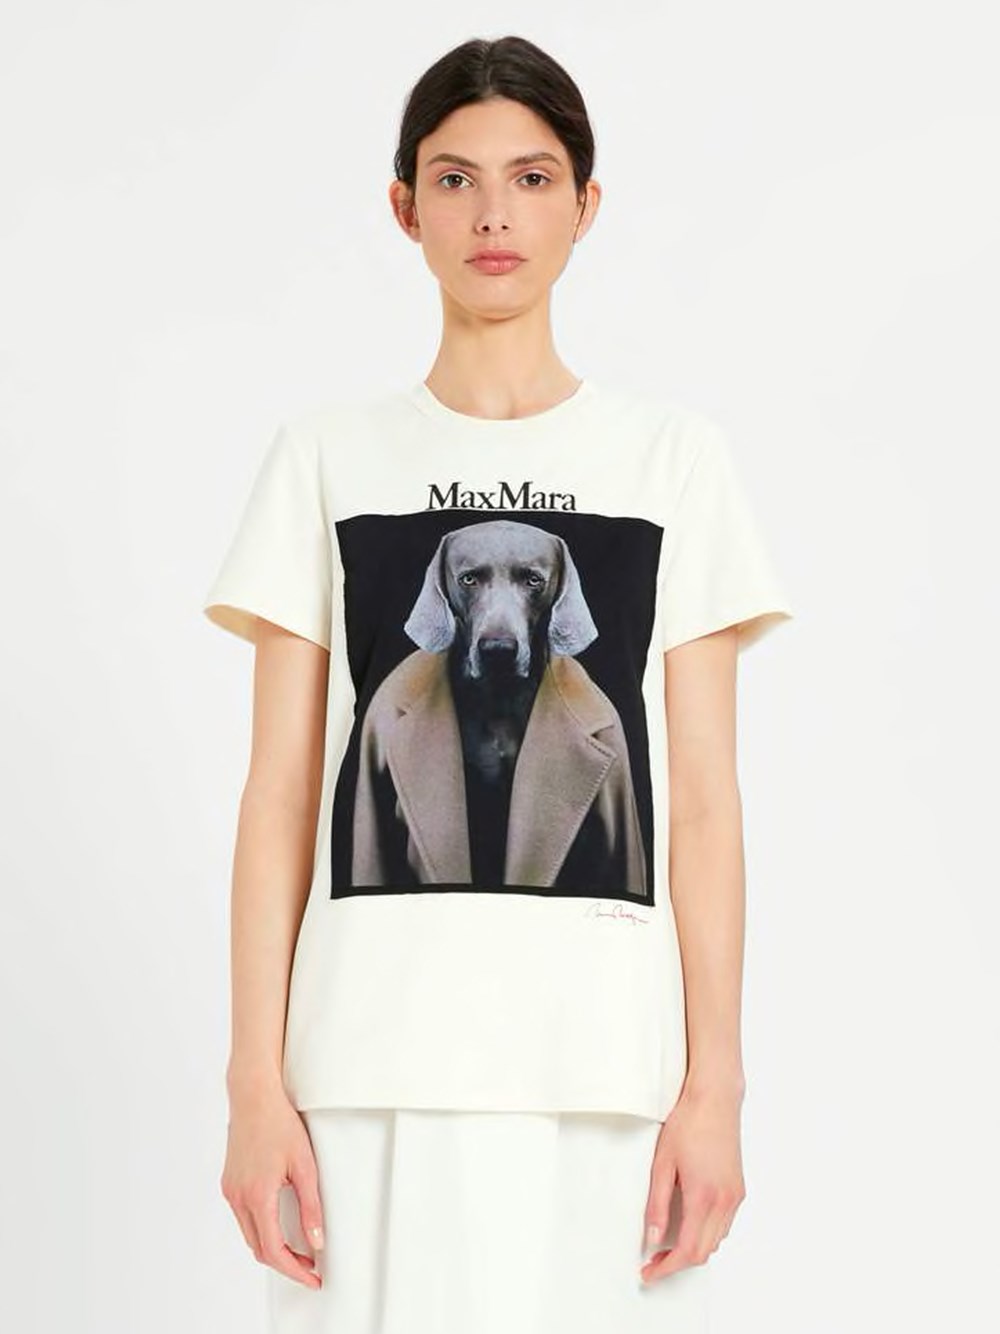 max mara DOGSTAR T-SHIRT available on montiboutique.com - 41947